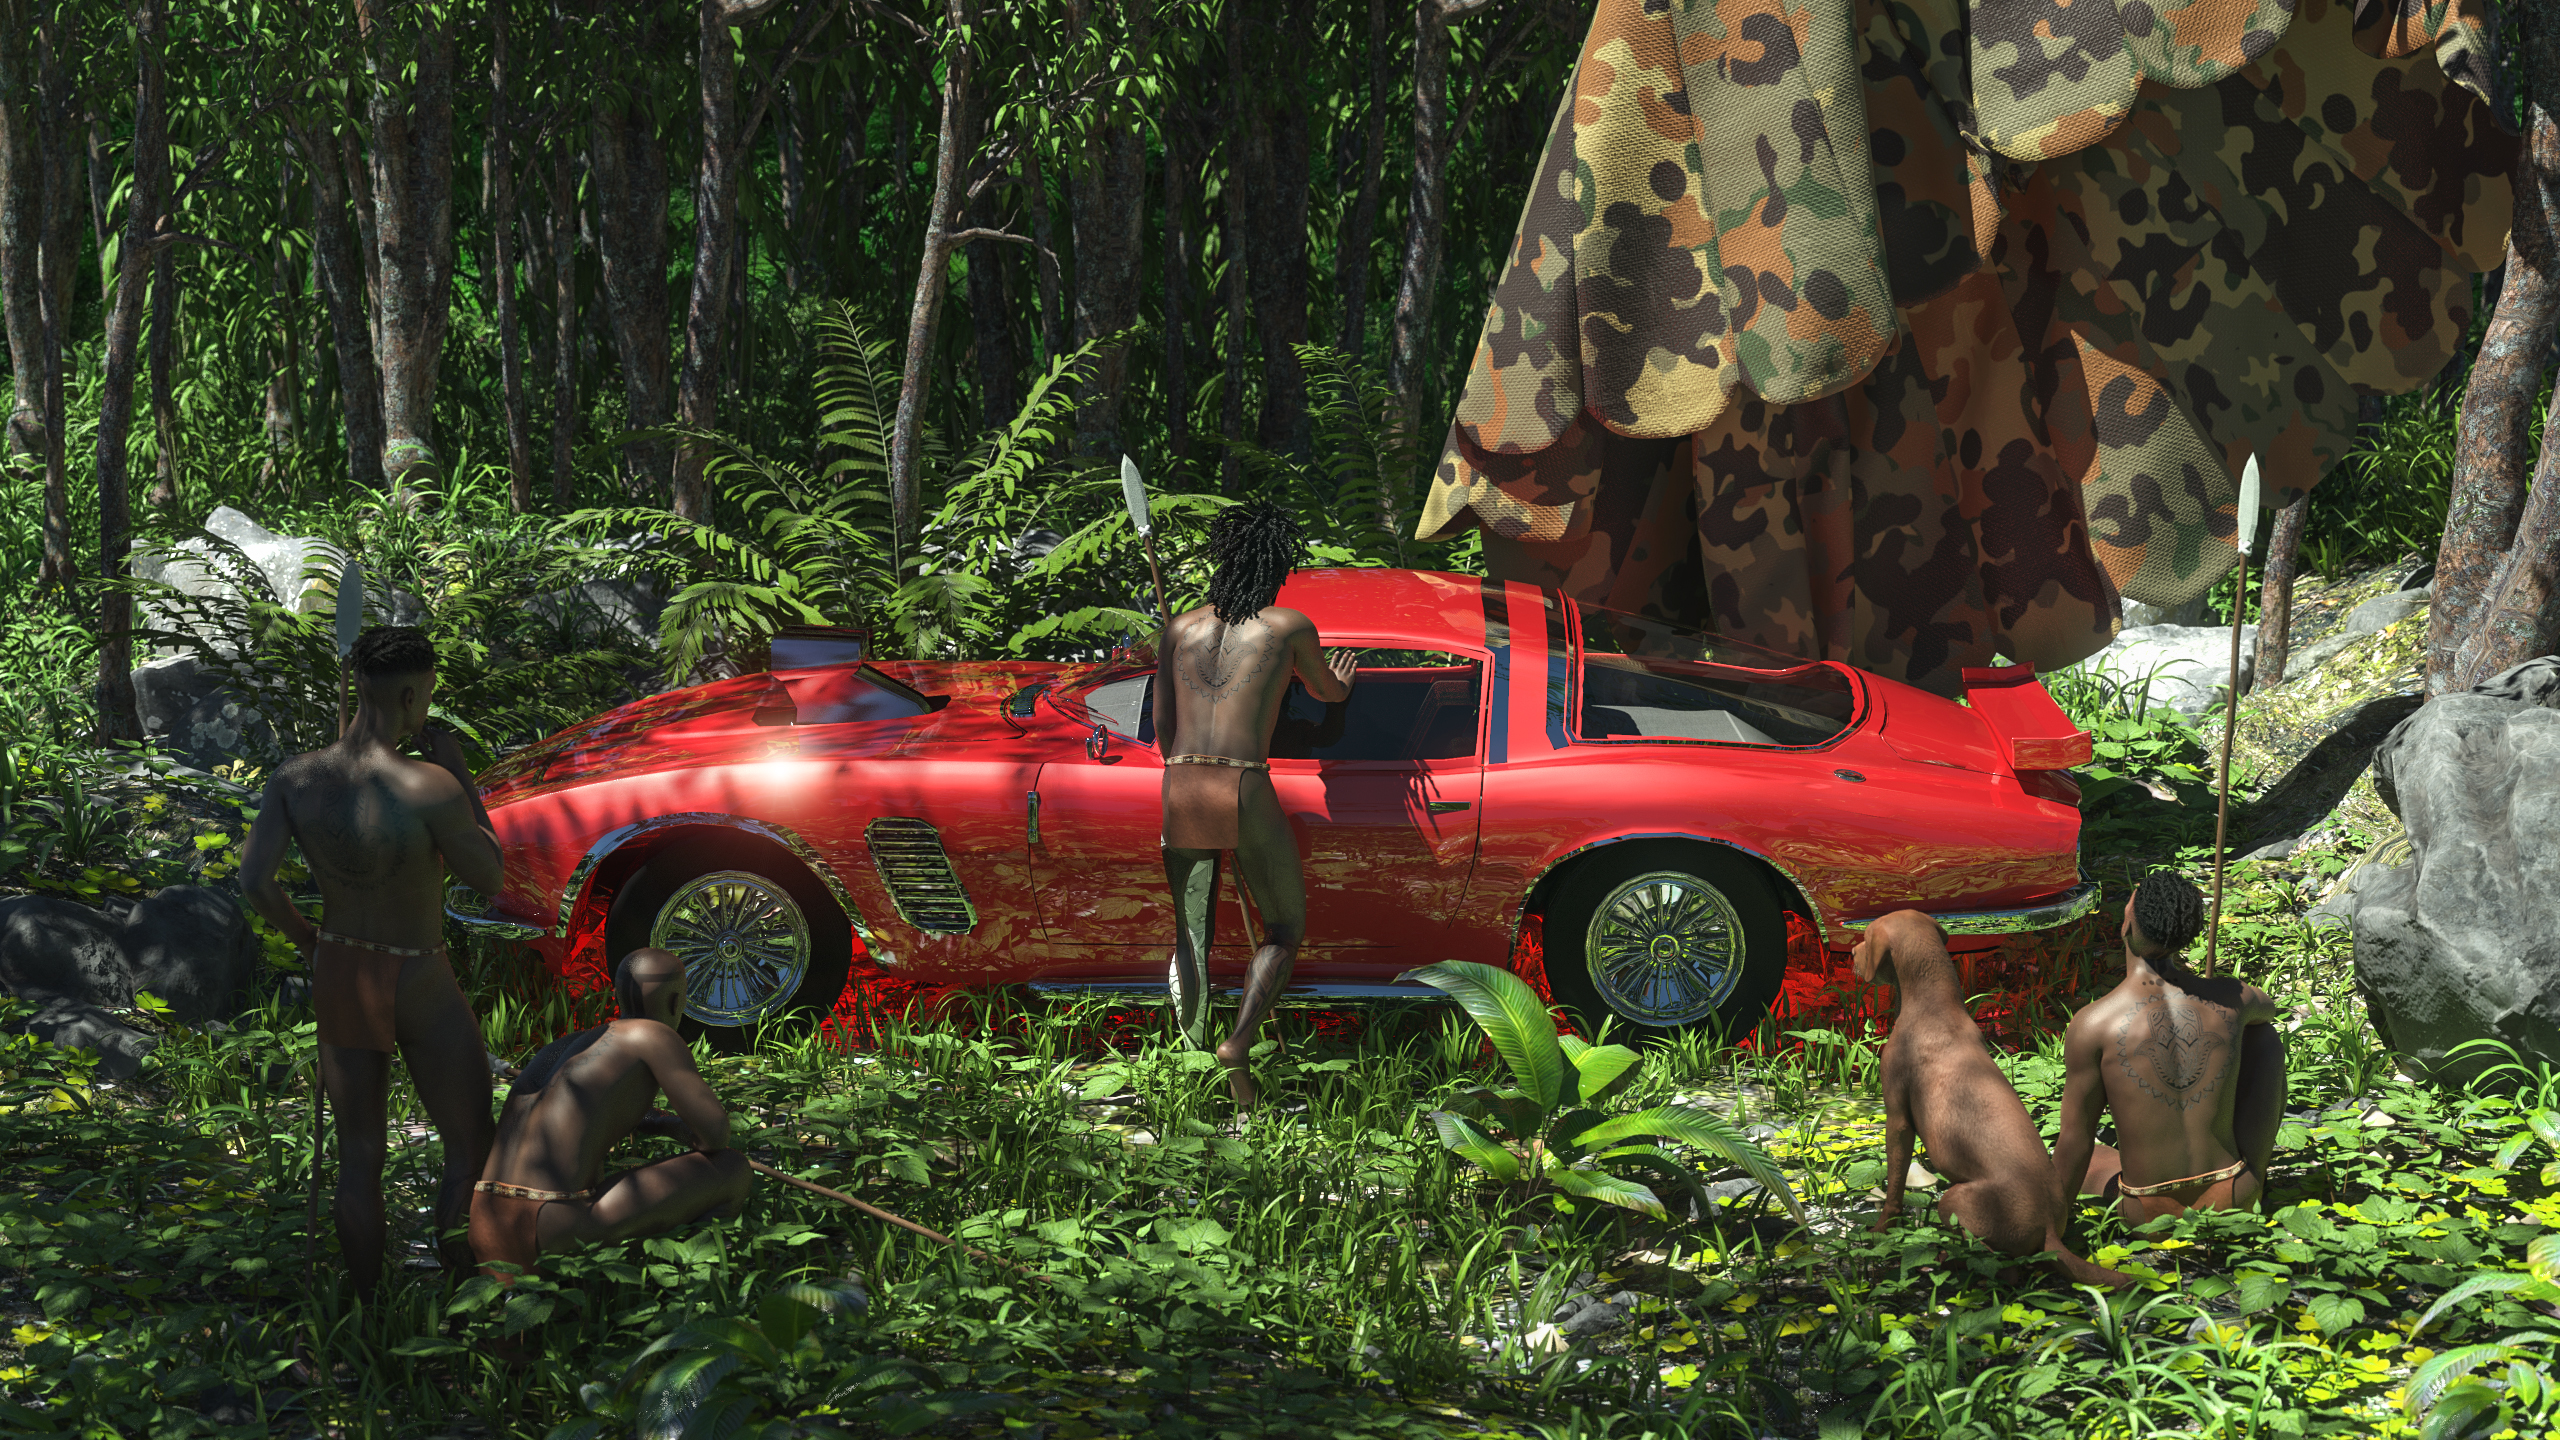 General 2560x1440 Daz 3D CGI jungle forest wood trees plants rocks car muscle cars parachutes tribe tribesmen dog spear red green